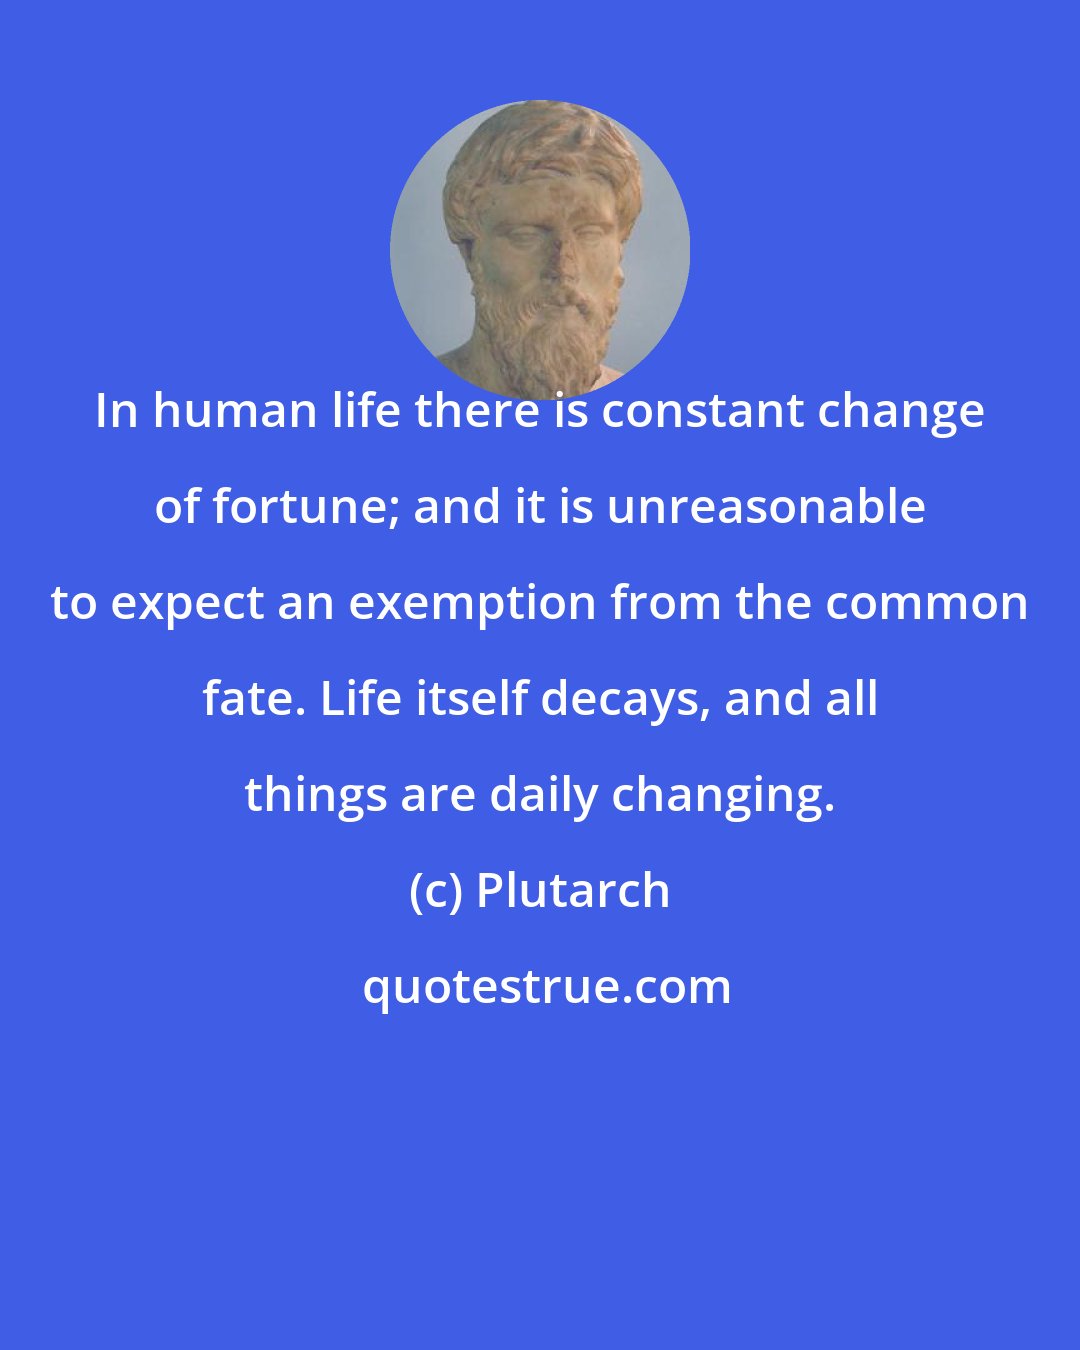 Plutarch: In human life there is constant change of fortune; and it is unreasonable to expect an exemption from the common fate. Life itself decays, and all things are daily changing.